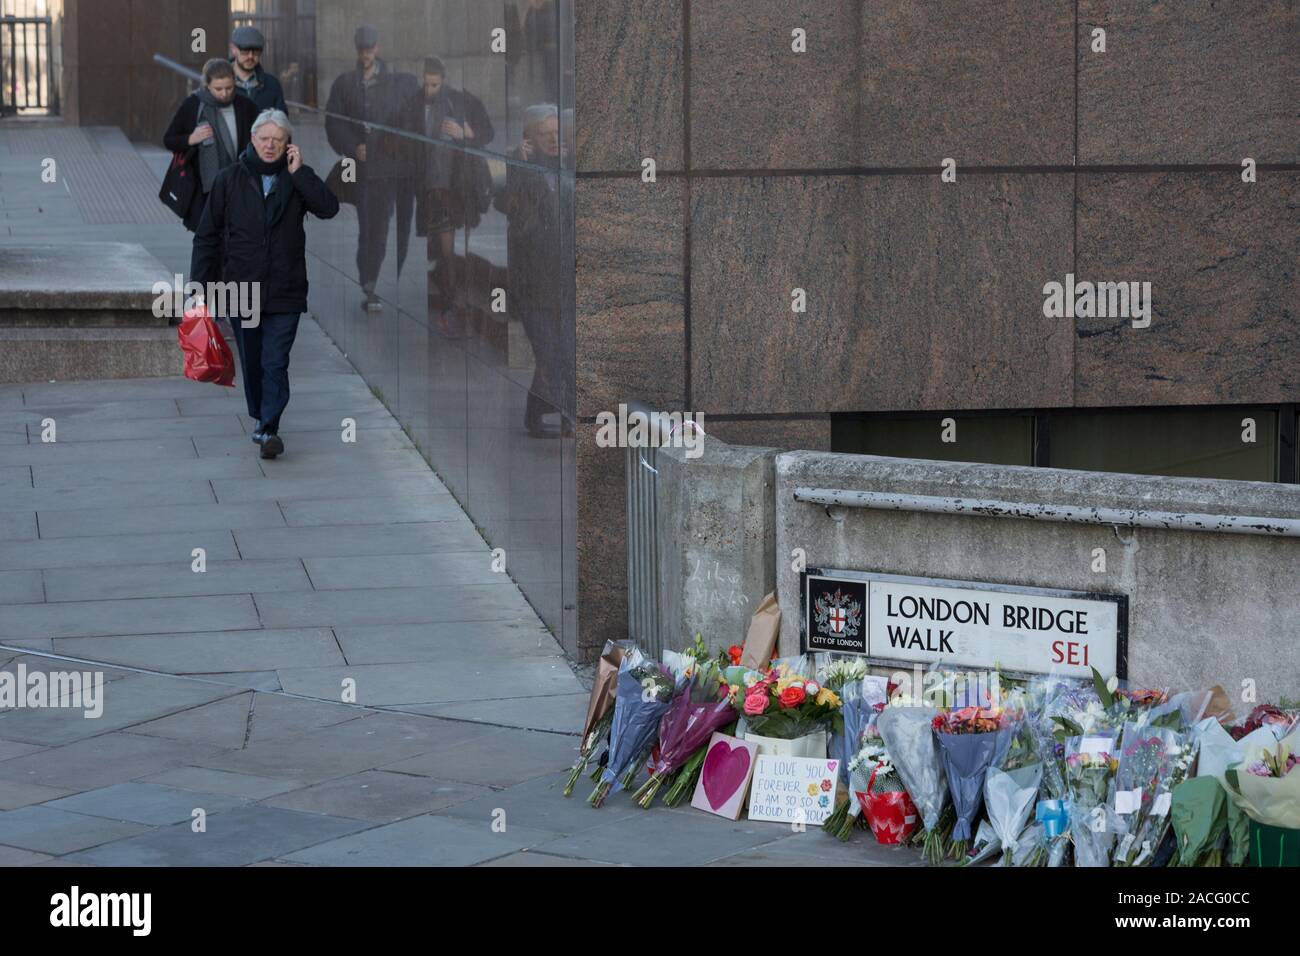 Three days after the killing of Jack Merritt, 25, and Saskia Jones, 23, by  the convicted teorrorist Usman Khan at Fishmongers' Hall on London Bridge,  a memorial of flowers appeared at the